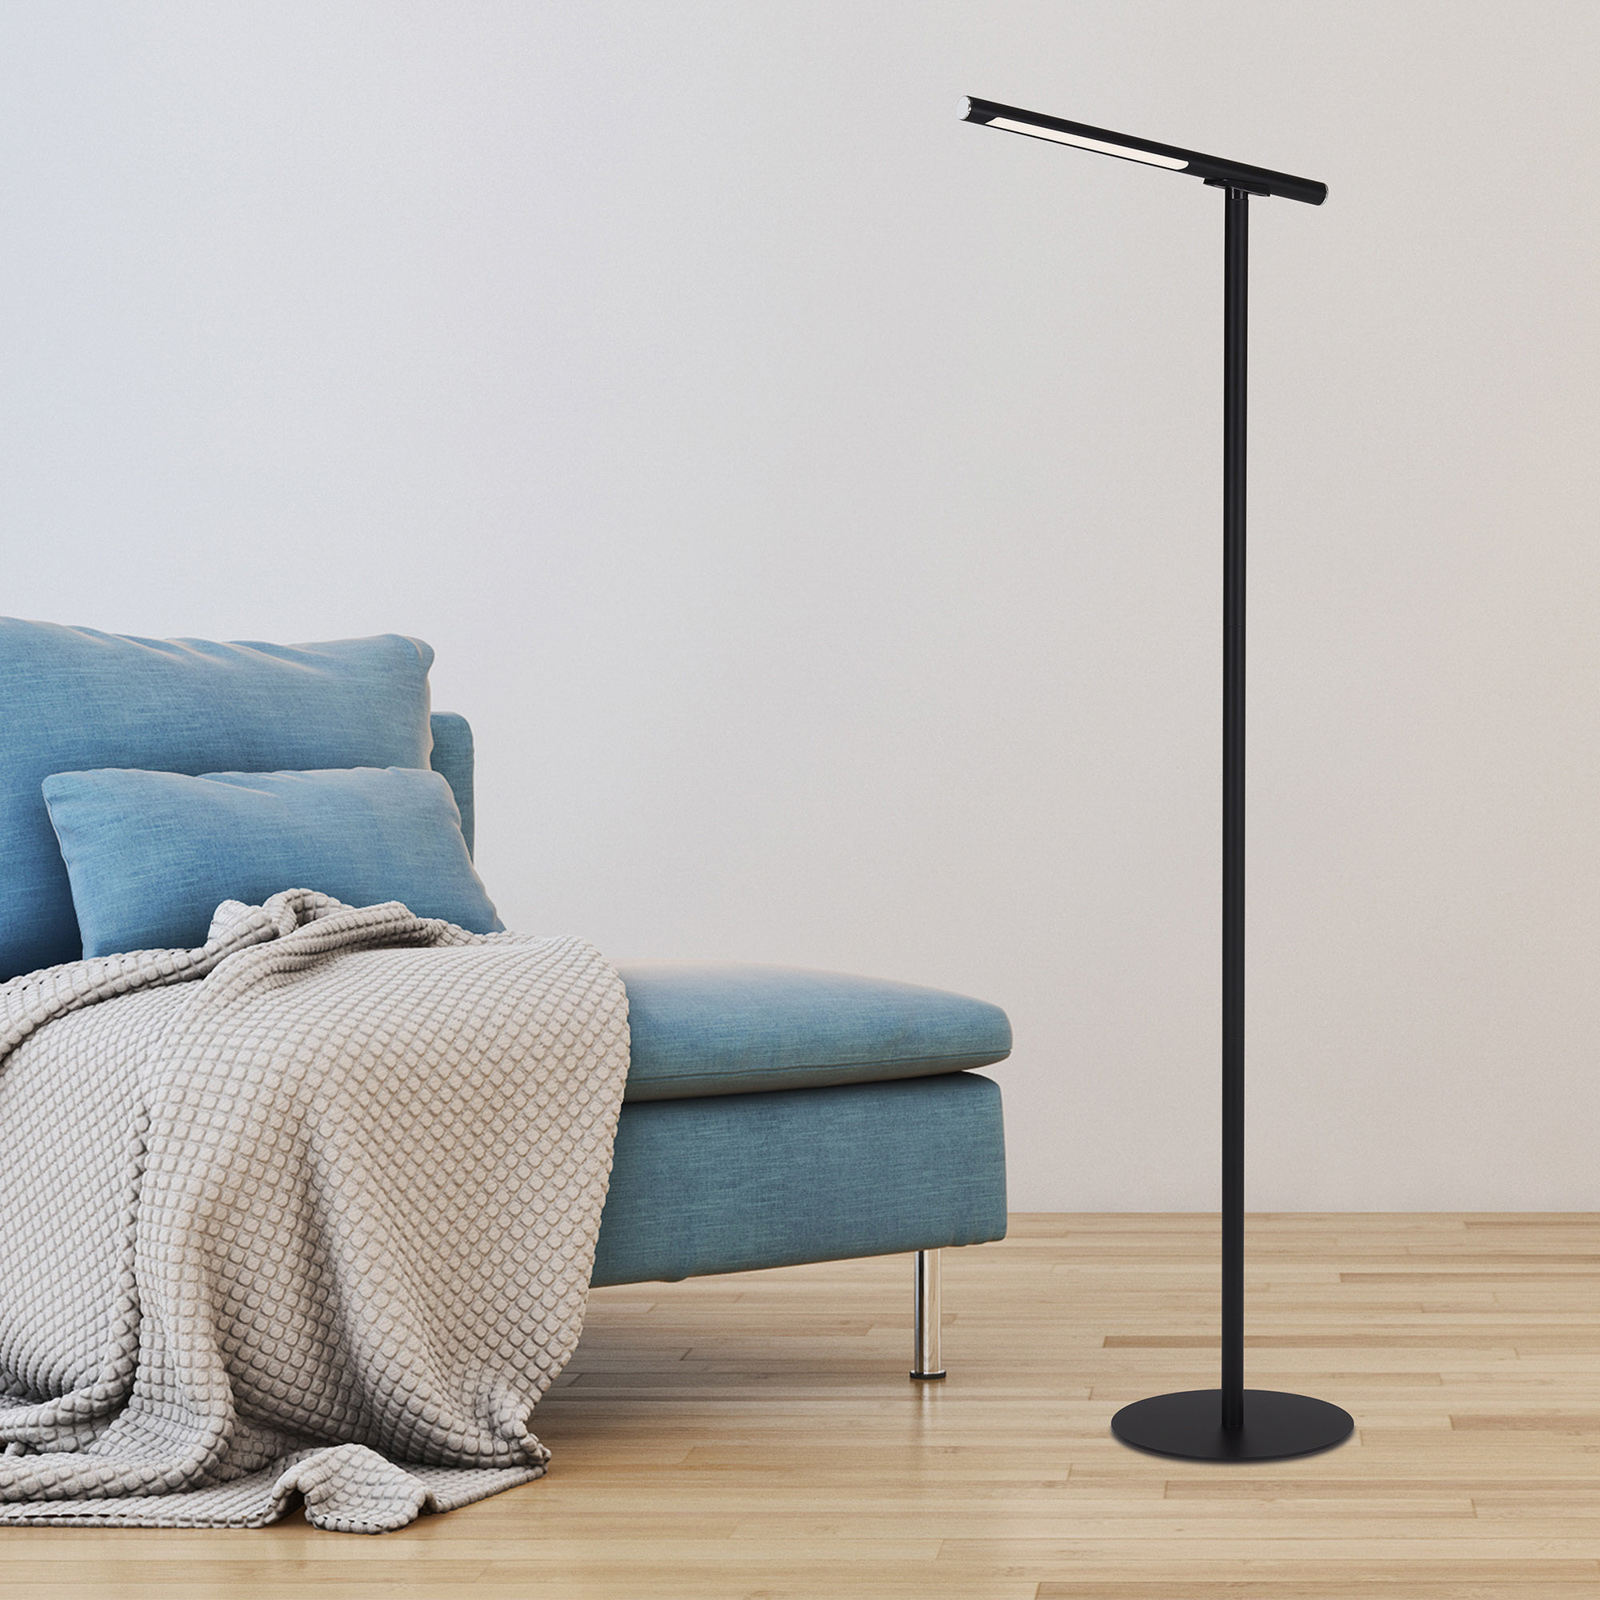 LED floor lamp Everywhere, black, rechargeable battery